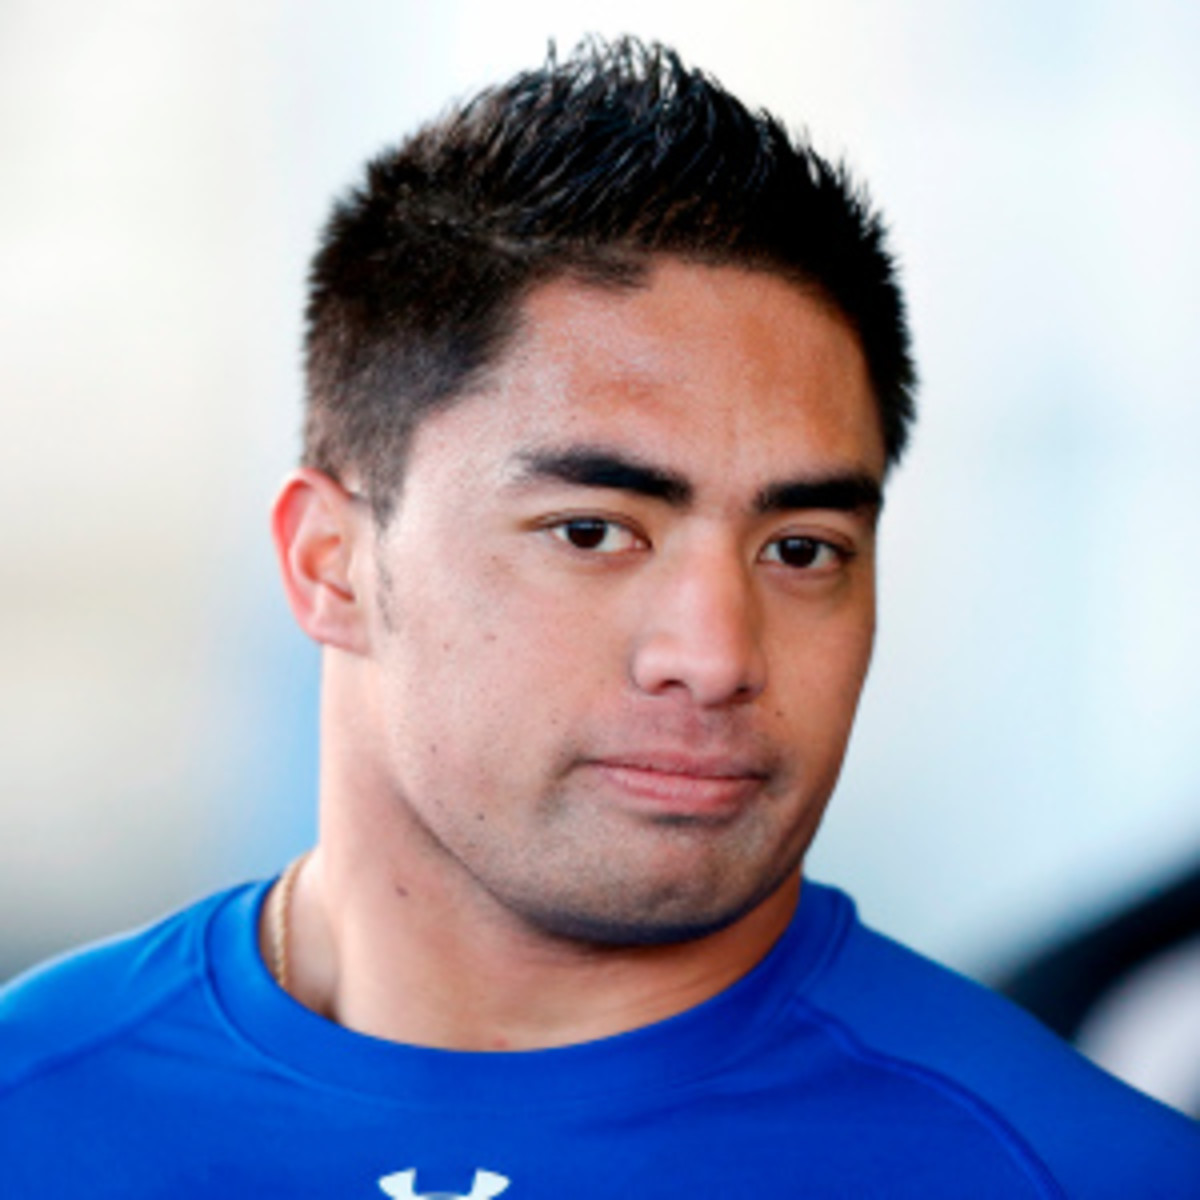 Ronaiah Tuiasosopo is the man behind the voice of Lennay Kekua and had hundreds of phone calls with Manti Te'o.  (J. Meric/Getty Images)